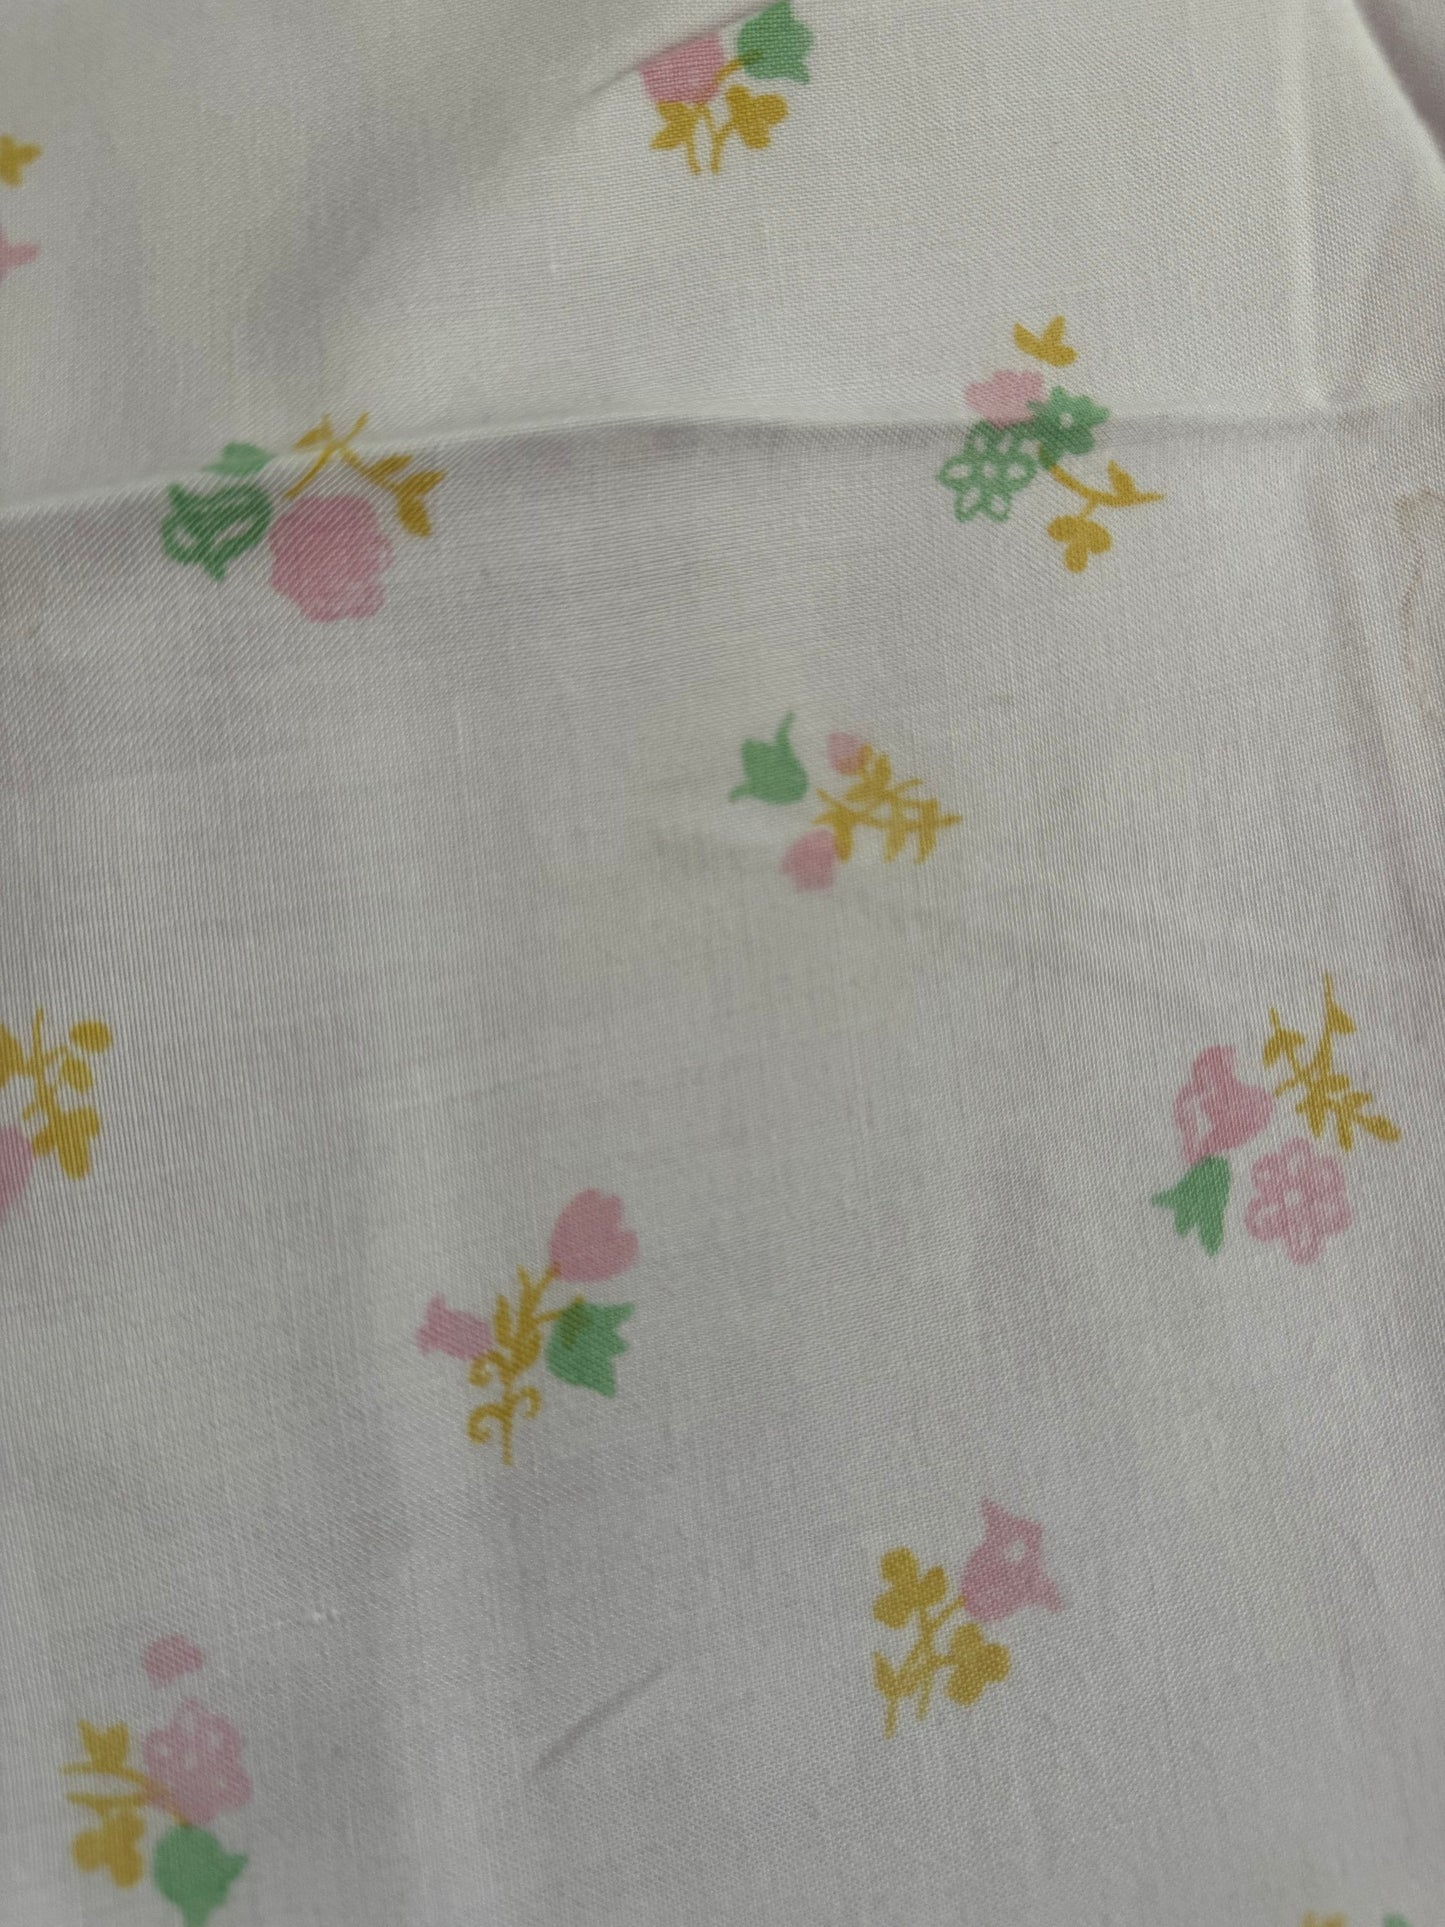 32” faded pink crochet edge floral ribbons Vintage printed tablecloth for tea party